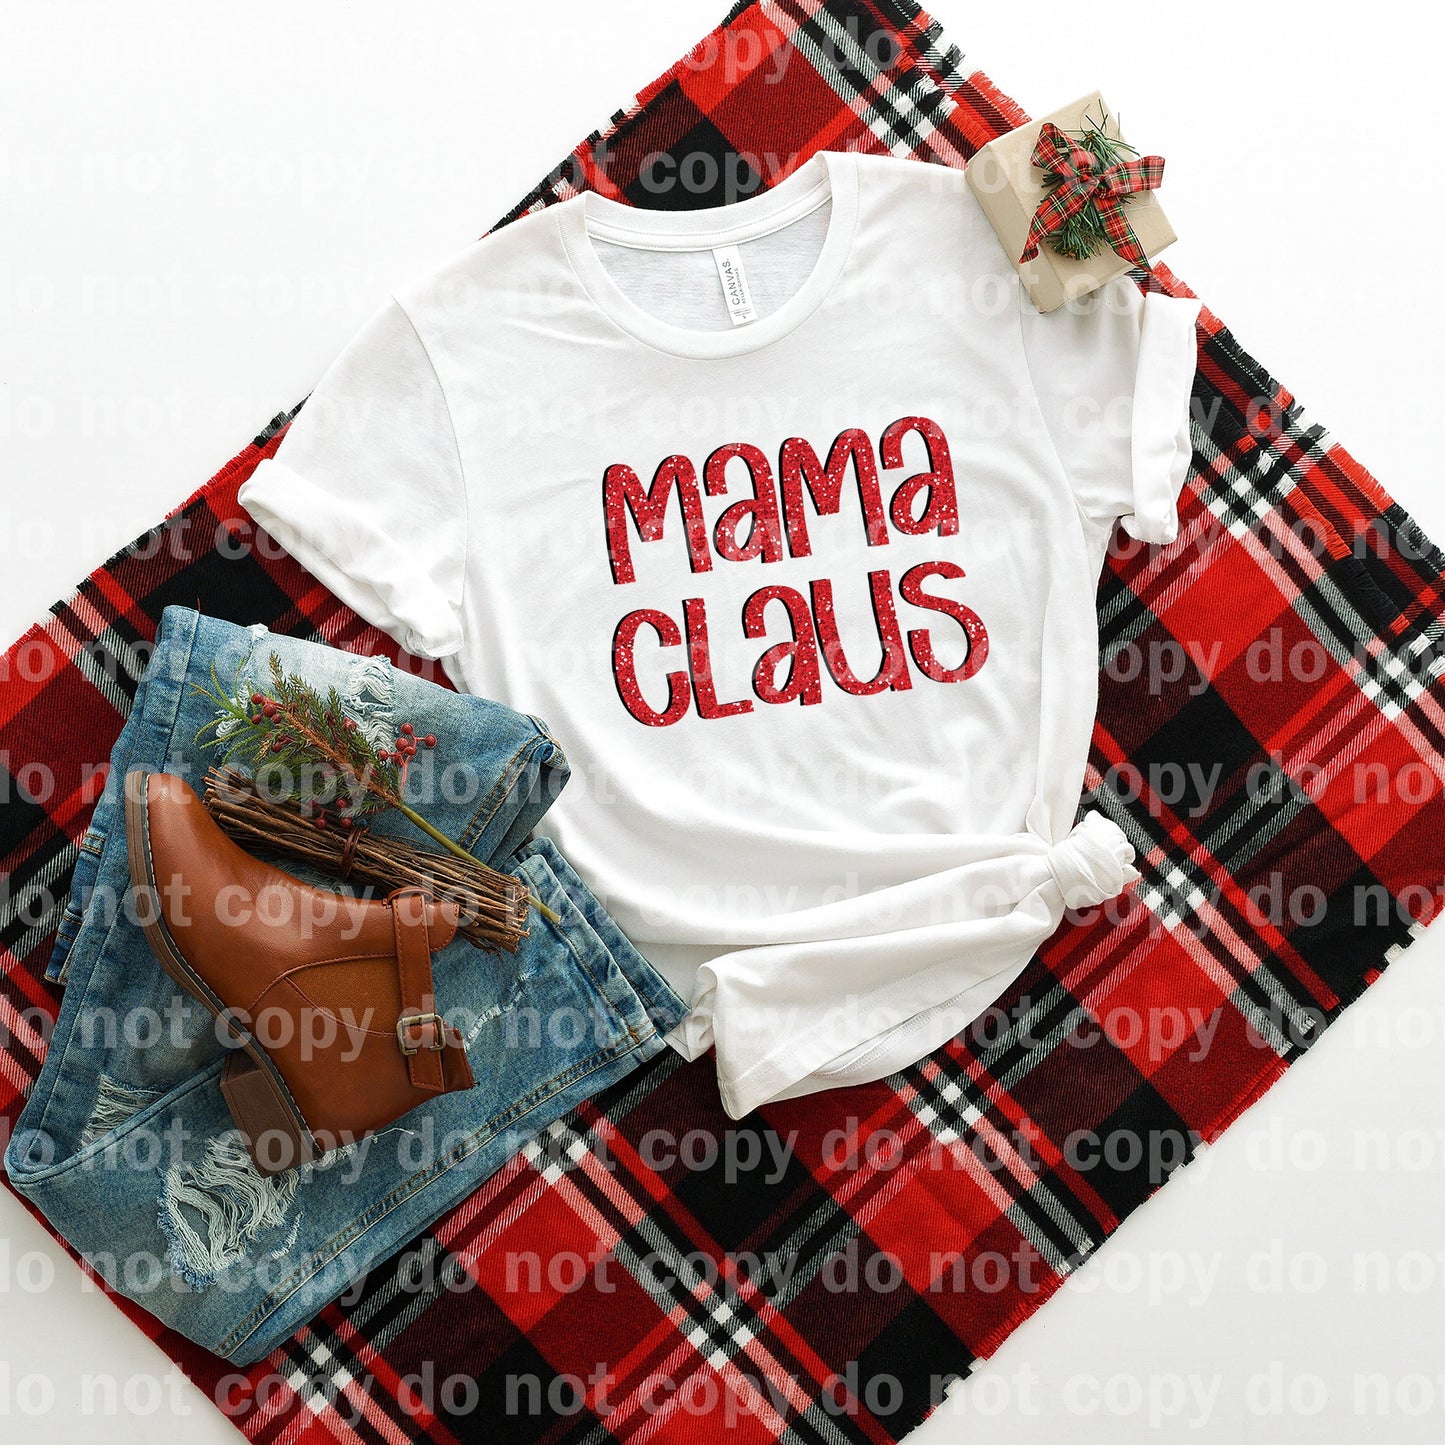 Mama Claus Typography Dream Print or Sublimation Print